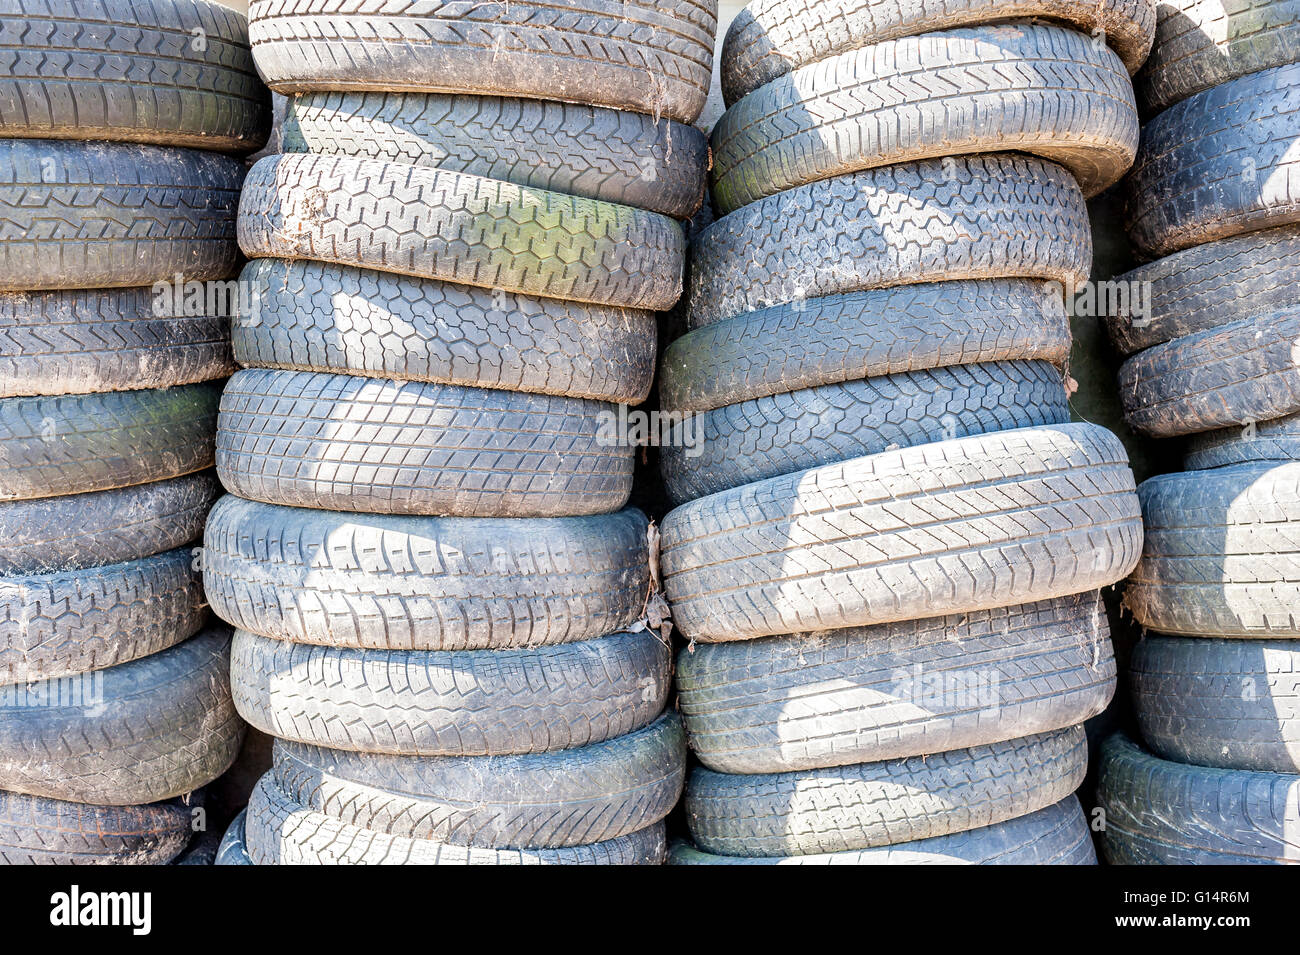 Old used tires stacked with high piles Stock Photo